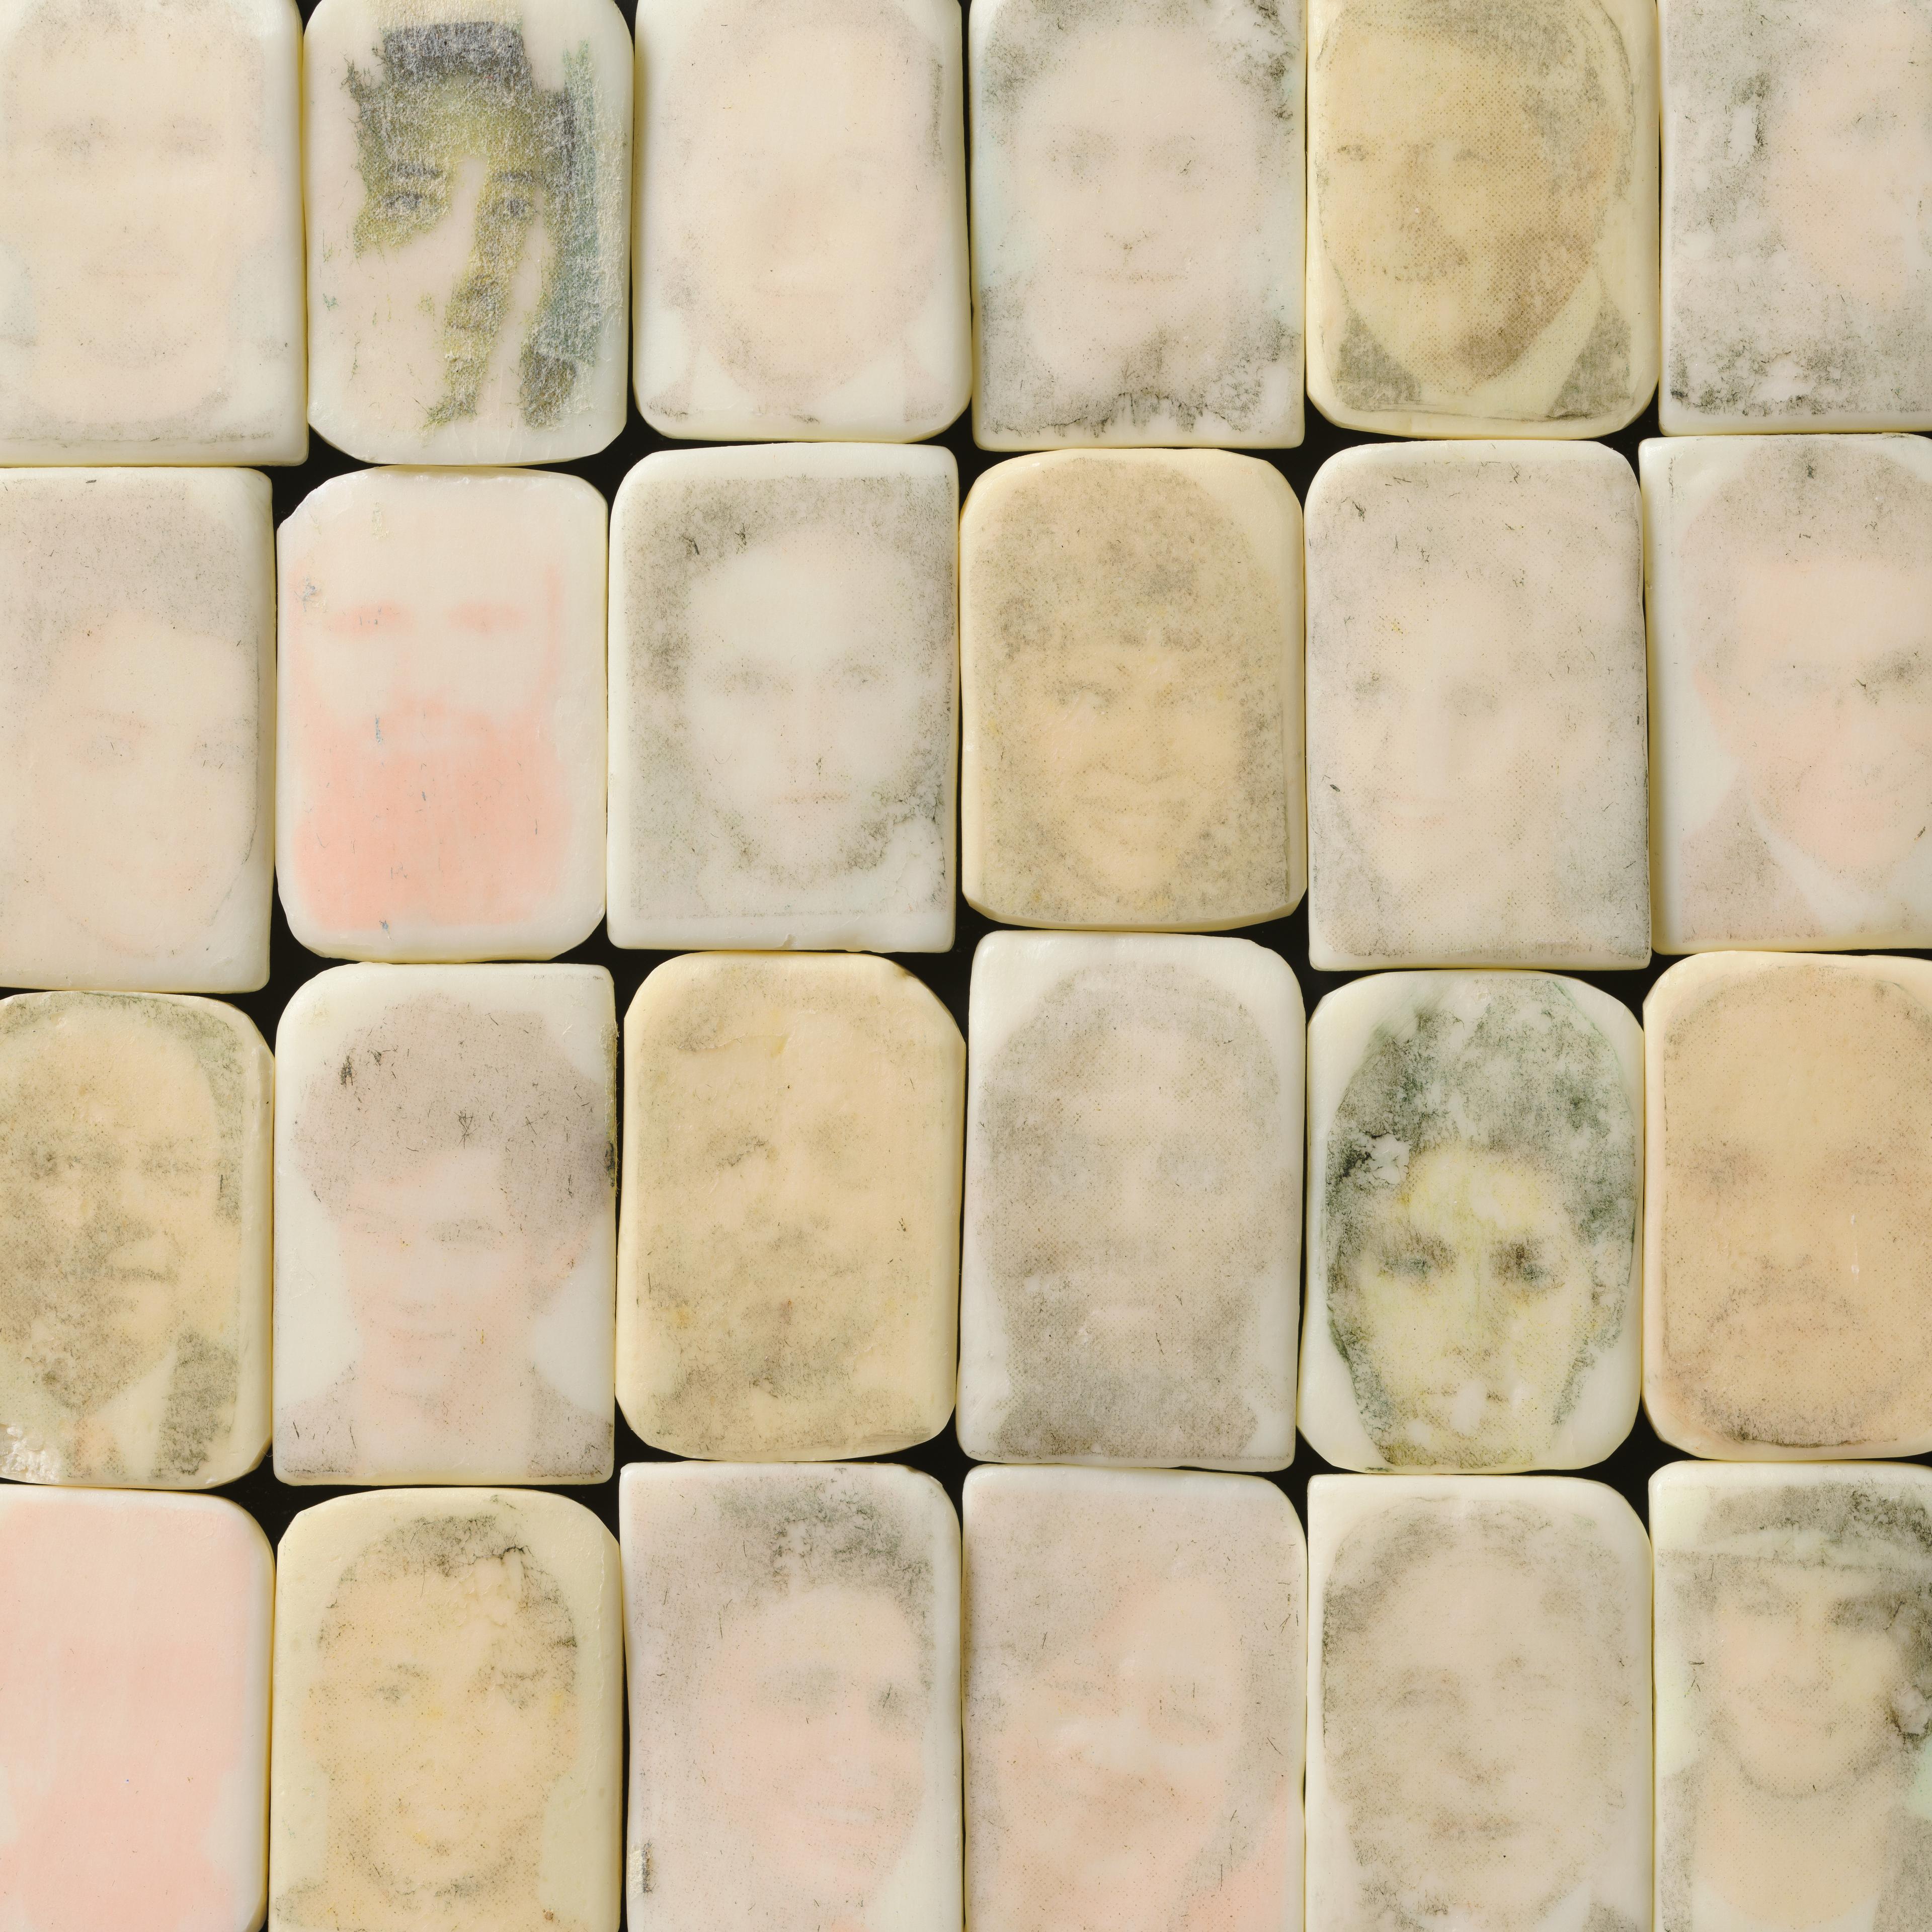 Marble stones aligned with faces drawn on them. 